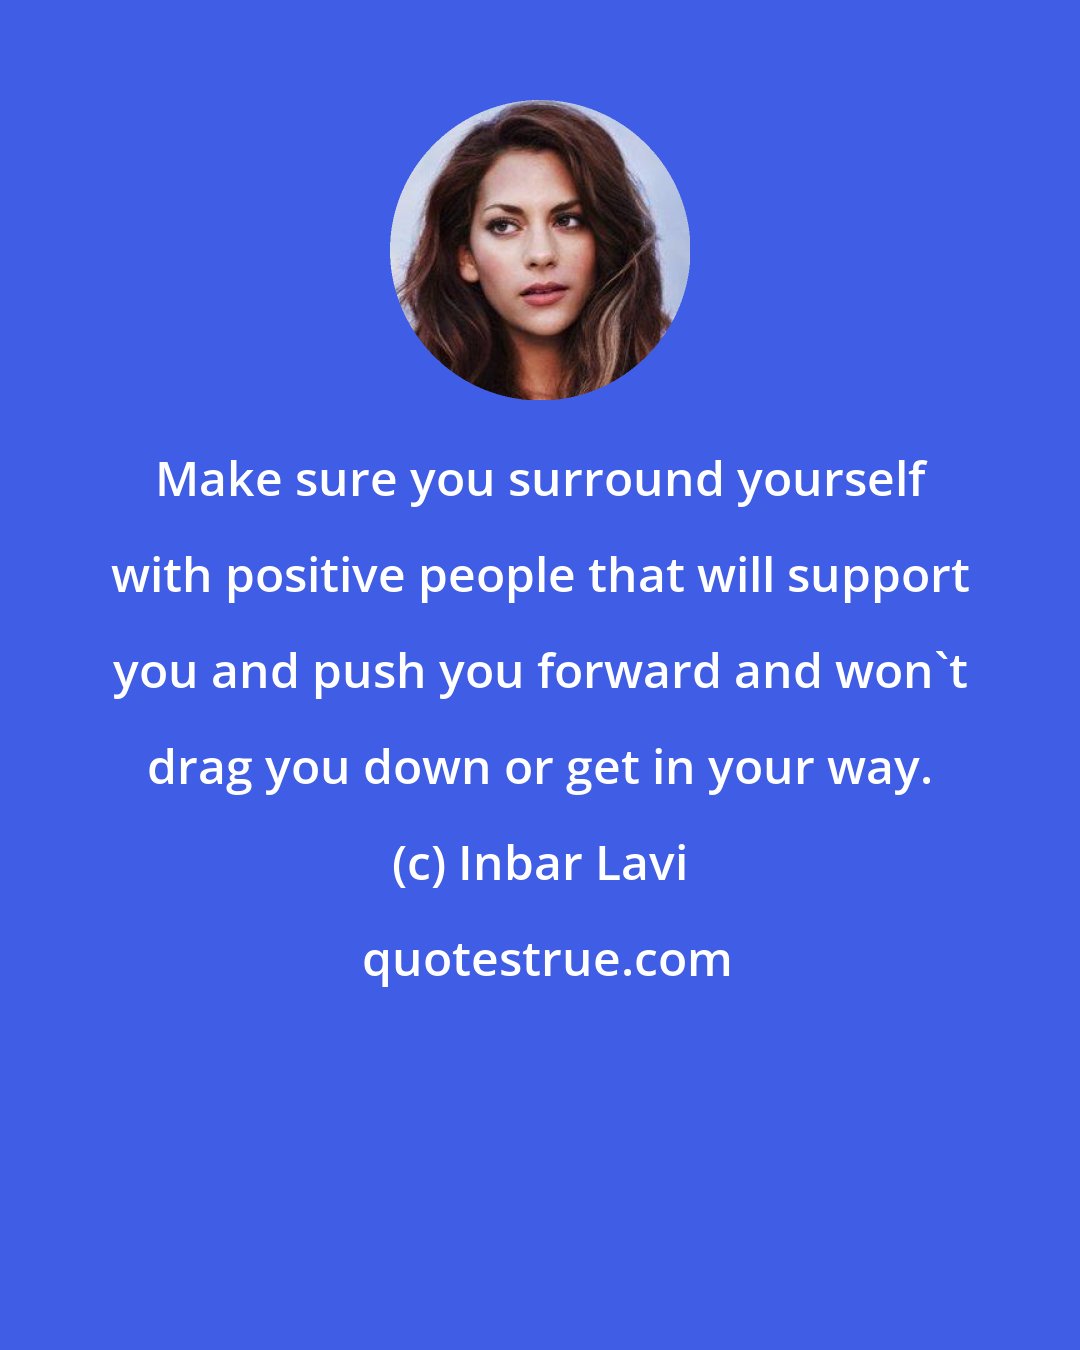 Inbar Lavi: Make sure you surround yourself with positive people that will support you and push you forward and won't drag you down or get in your way.